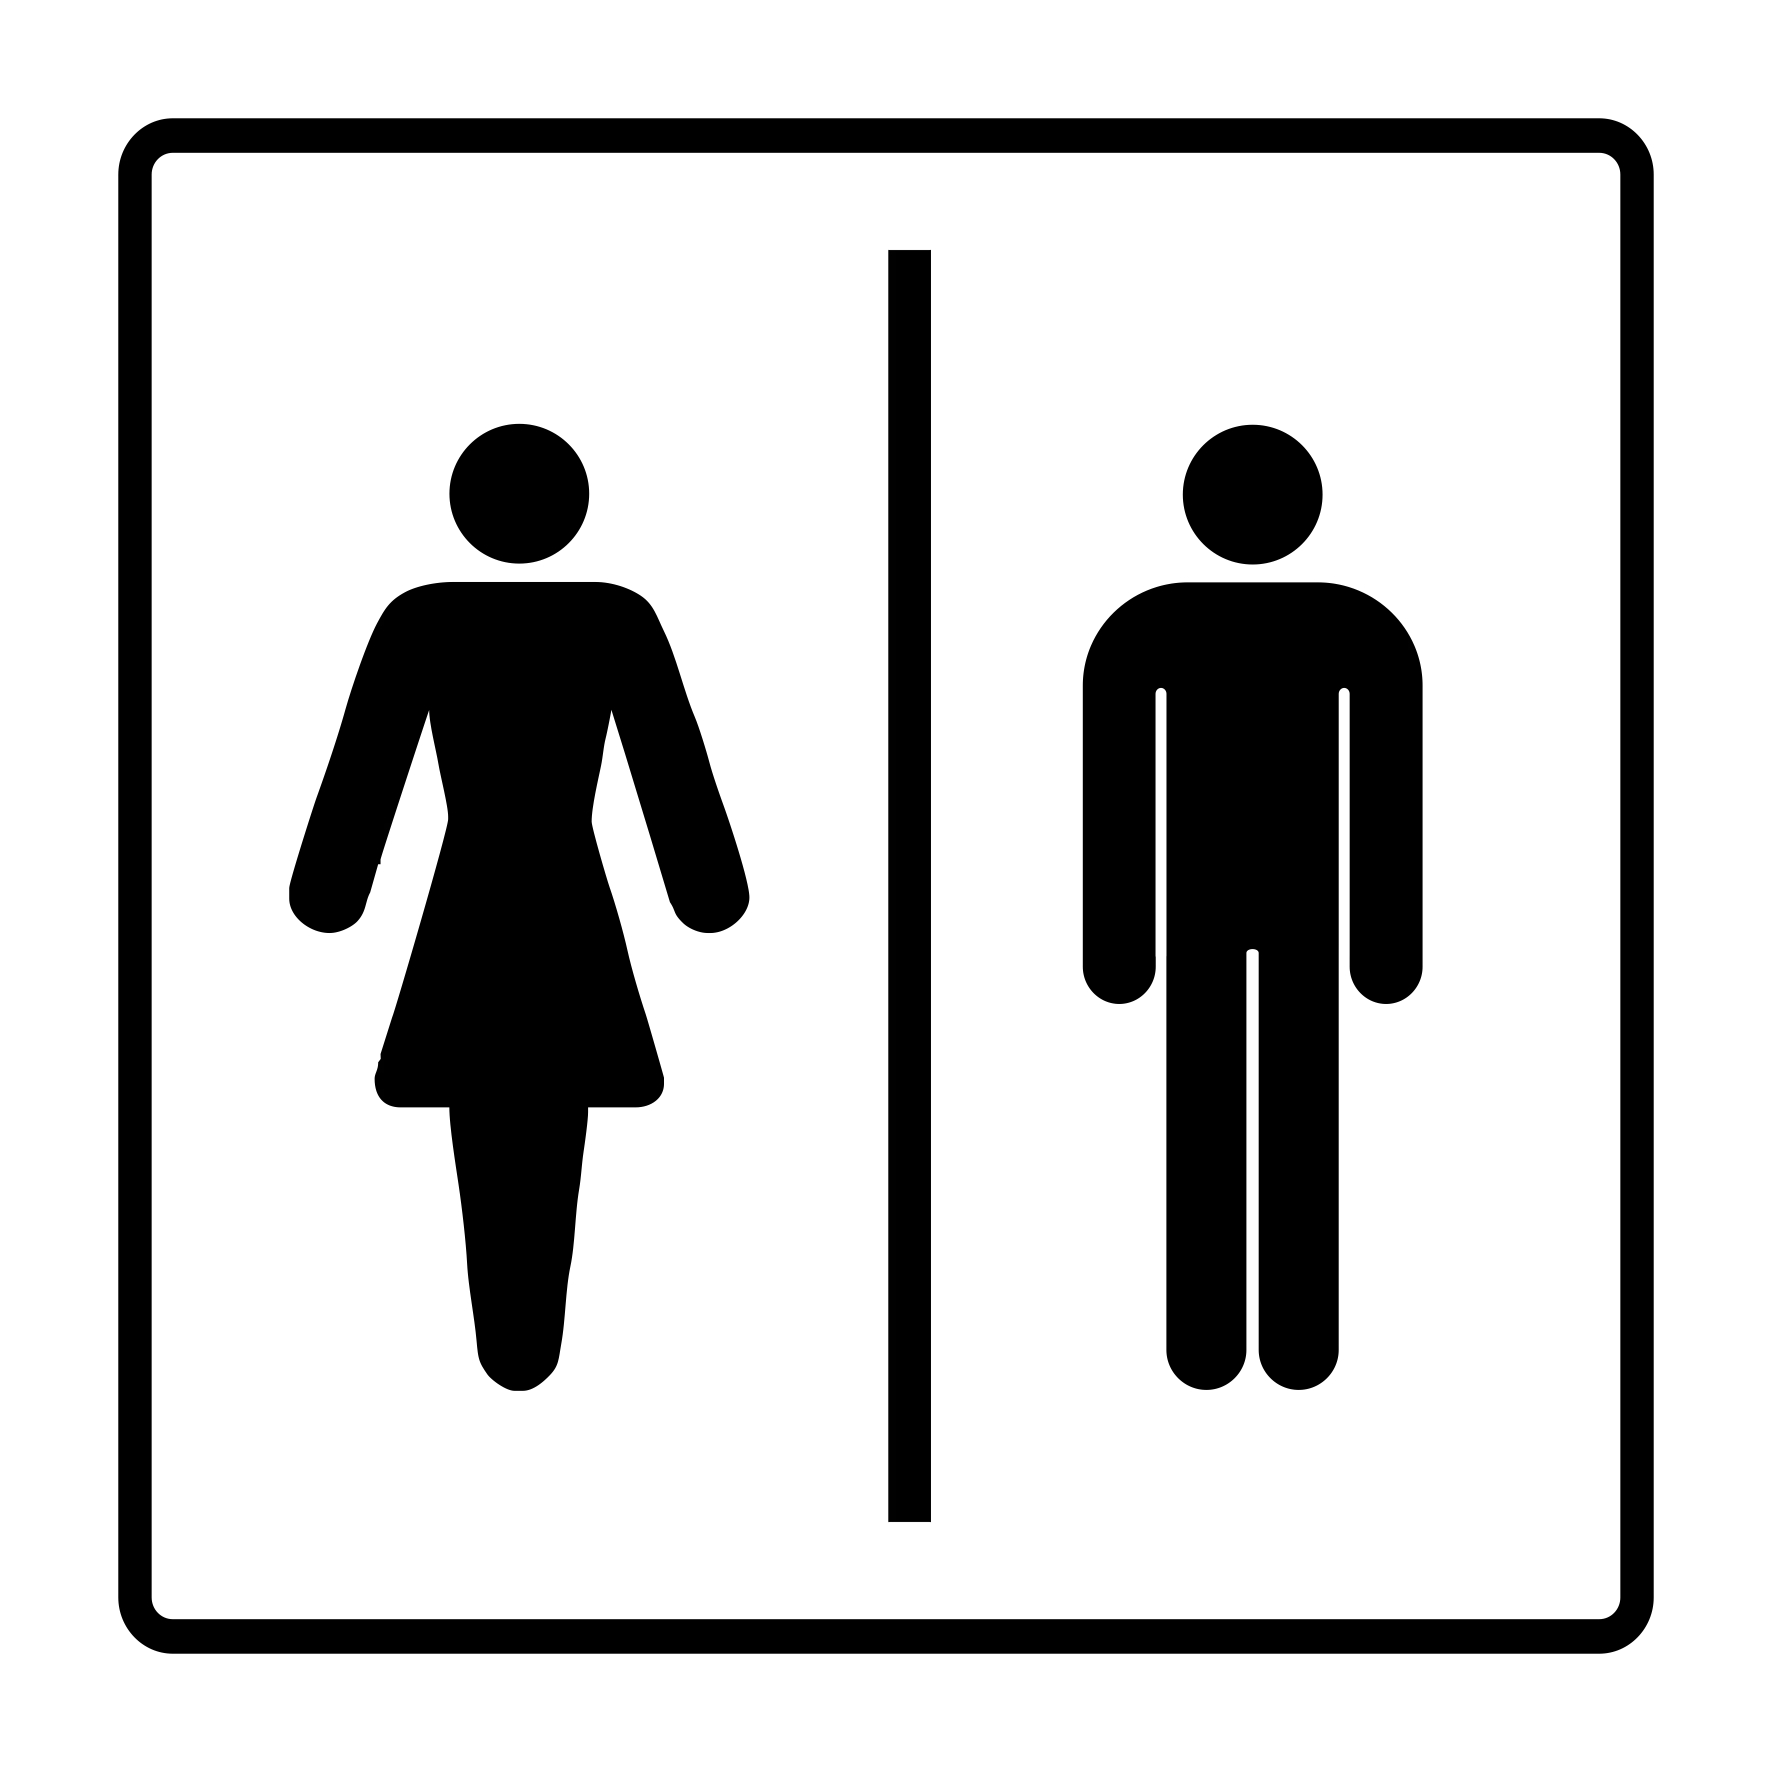 Toilets - Marine Terminal and Airport Signage - Safeway Systems